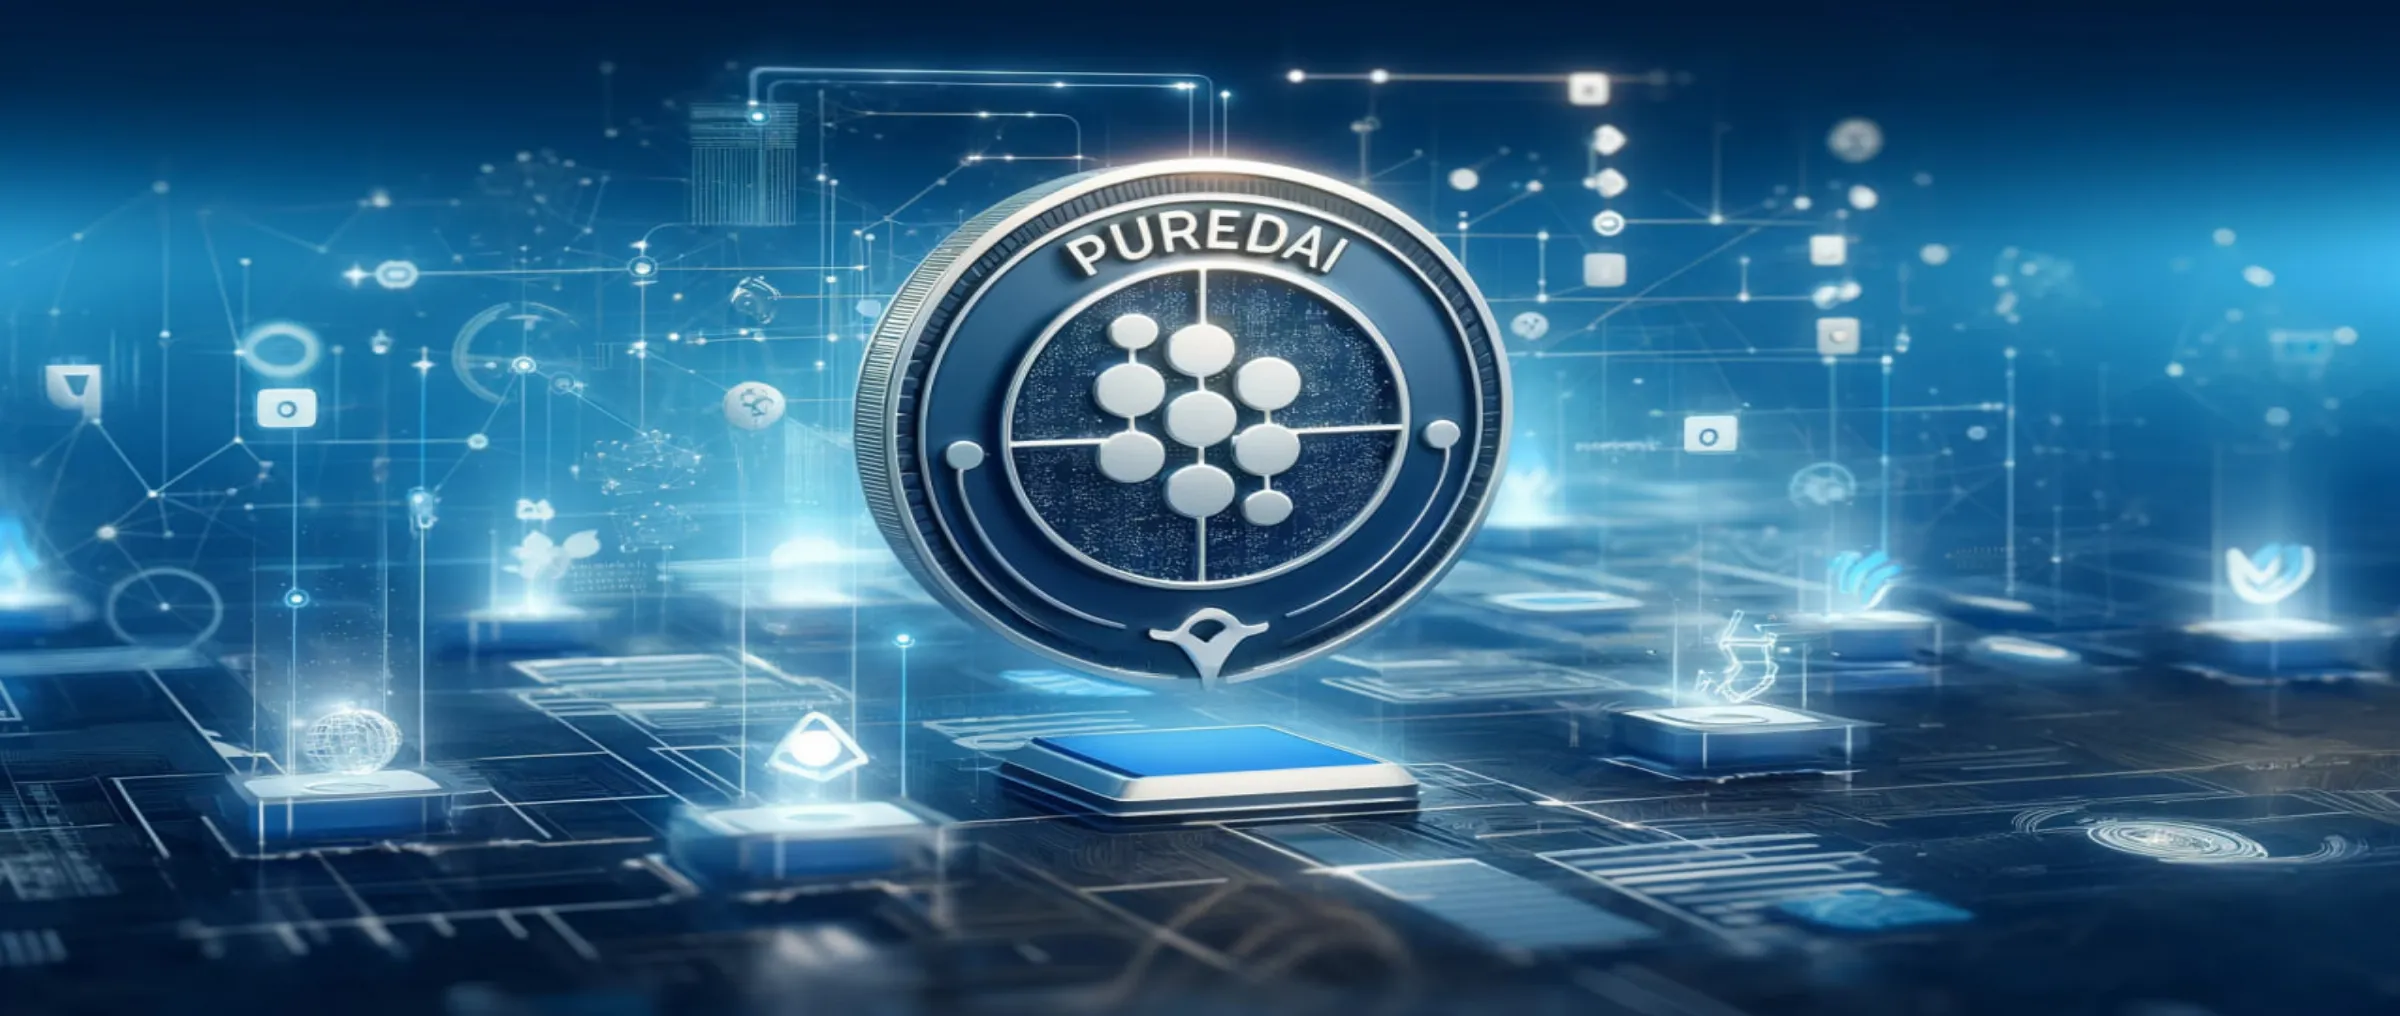 MakerDAO has announced the launch of a fully decentralized stablecoin called PureDai